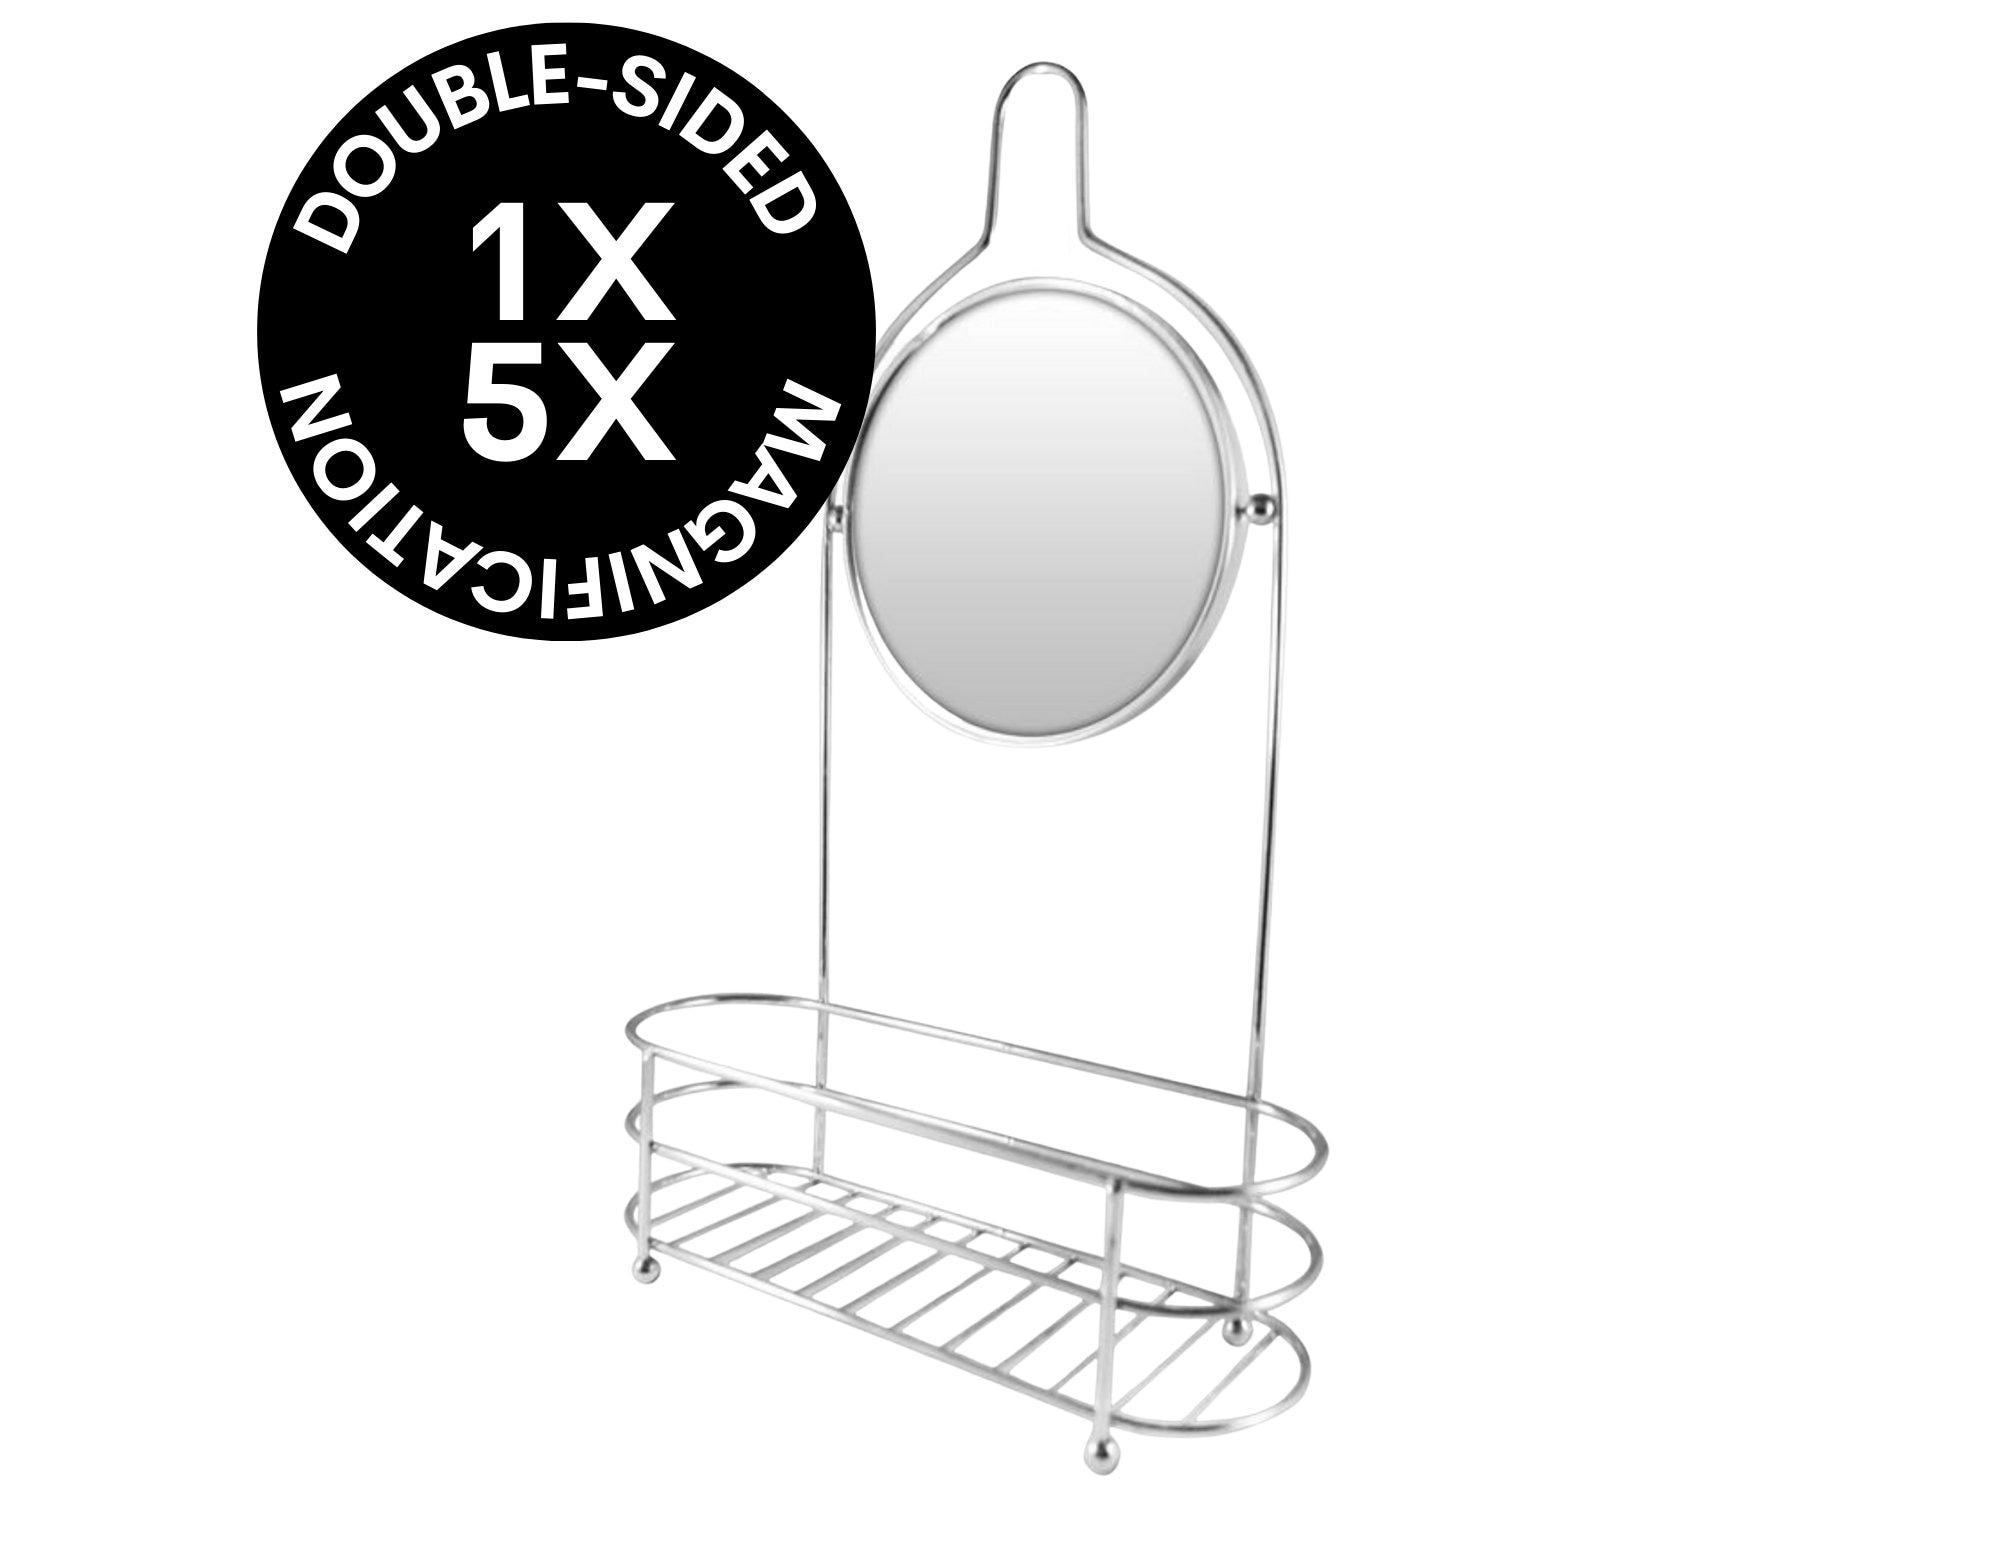 CLEARANCE 1X/5X Double-sided Fog Free Shower Mirror & Organizer 5.75d X 16h  